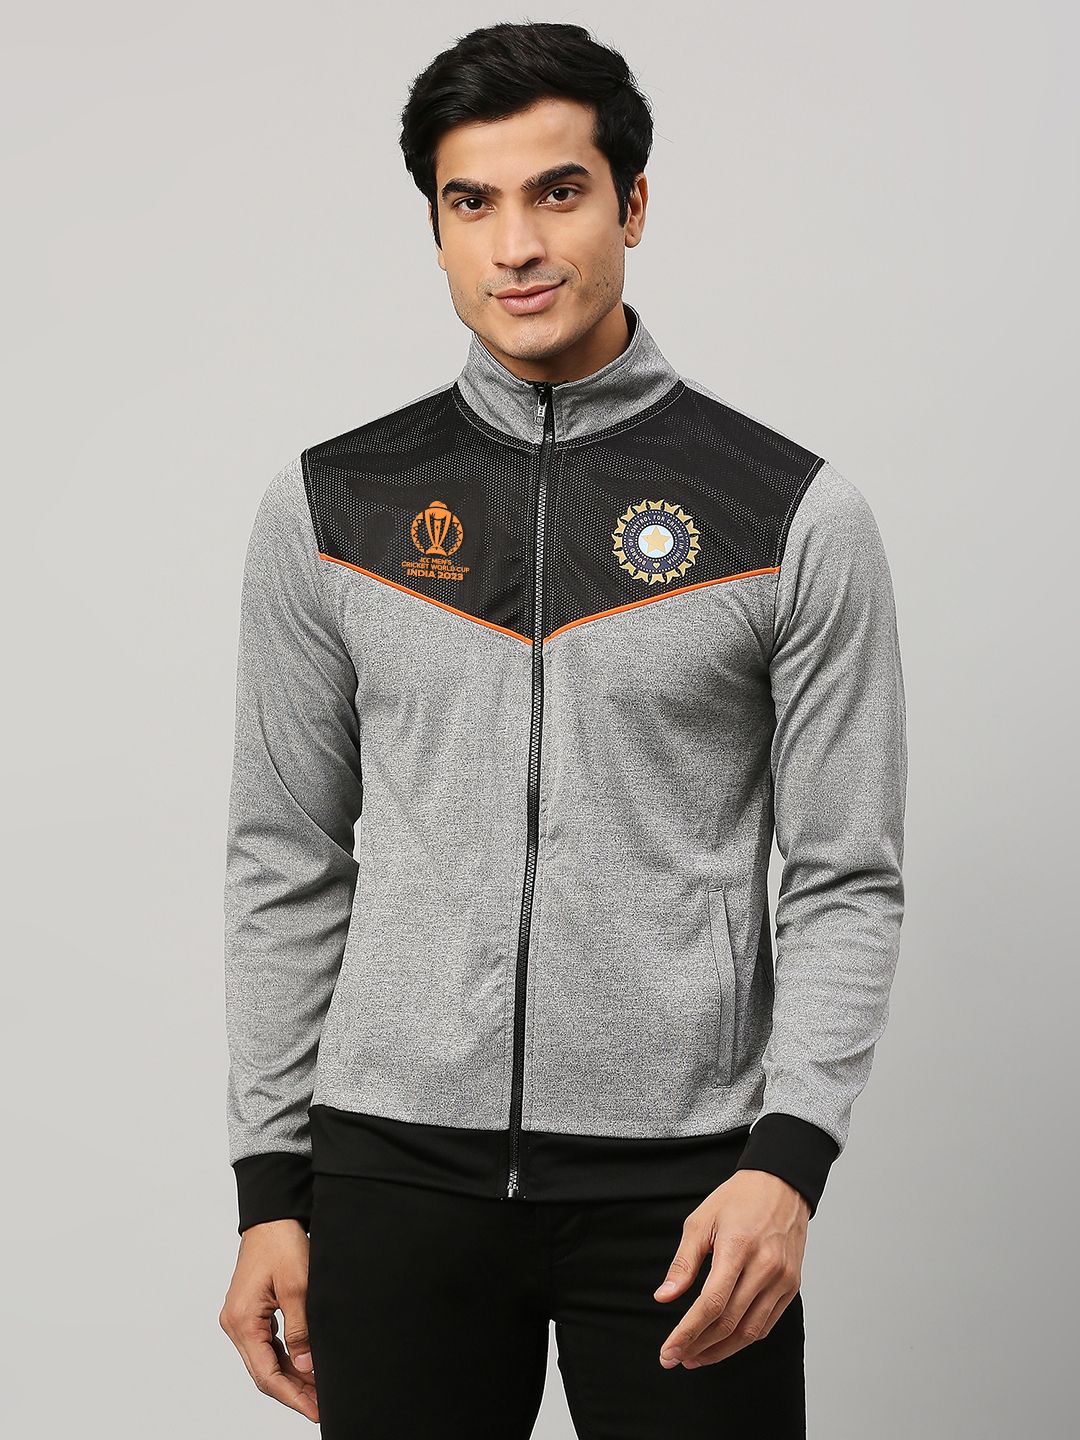 Buy Official ICC CWC-23 Men Grey and Black Colourblocked Long Sleeves ...